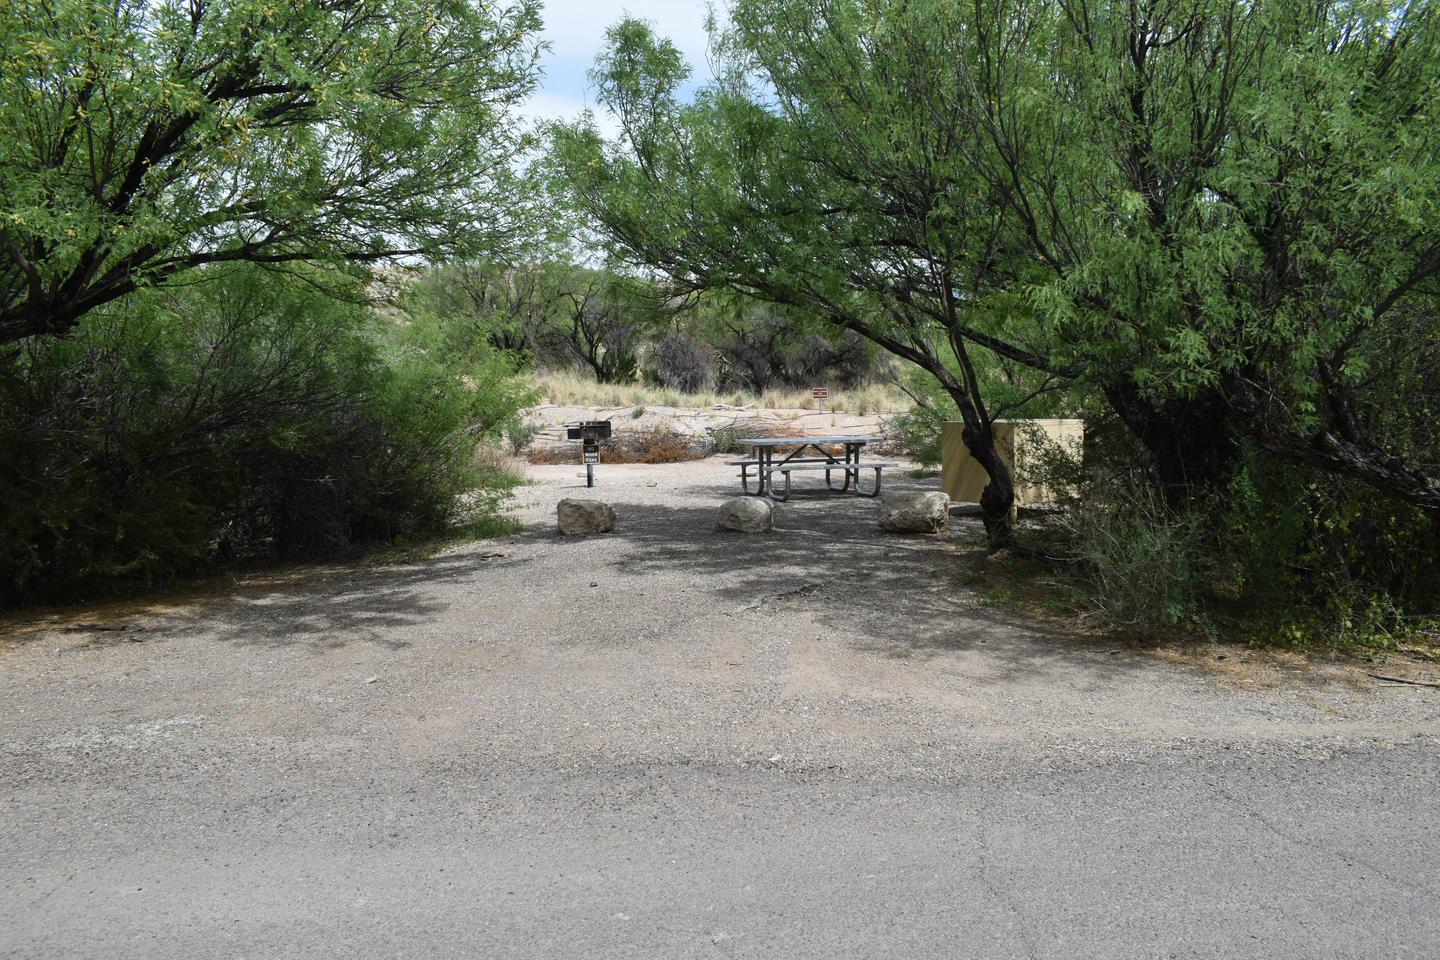 Distant view of site 34 from the main road. The driveway is short, with low-hanging branches that could pose an issue for tall RVs and vehicles. The main campsite area is open, with very little protection from the sun, but does offer some privacy from the surrounding bushes and trees. View of Site 34 from the roadway